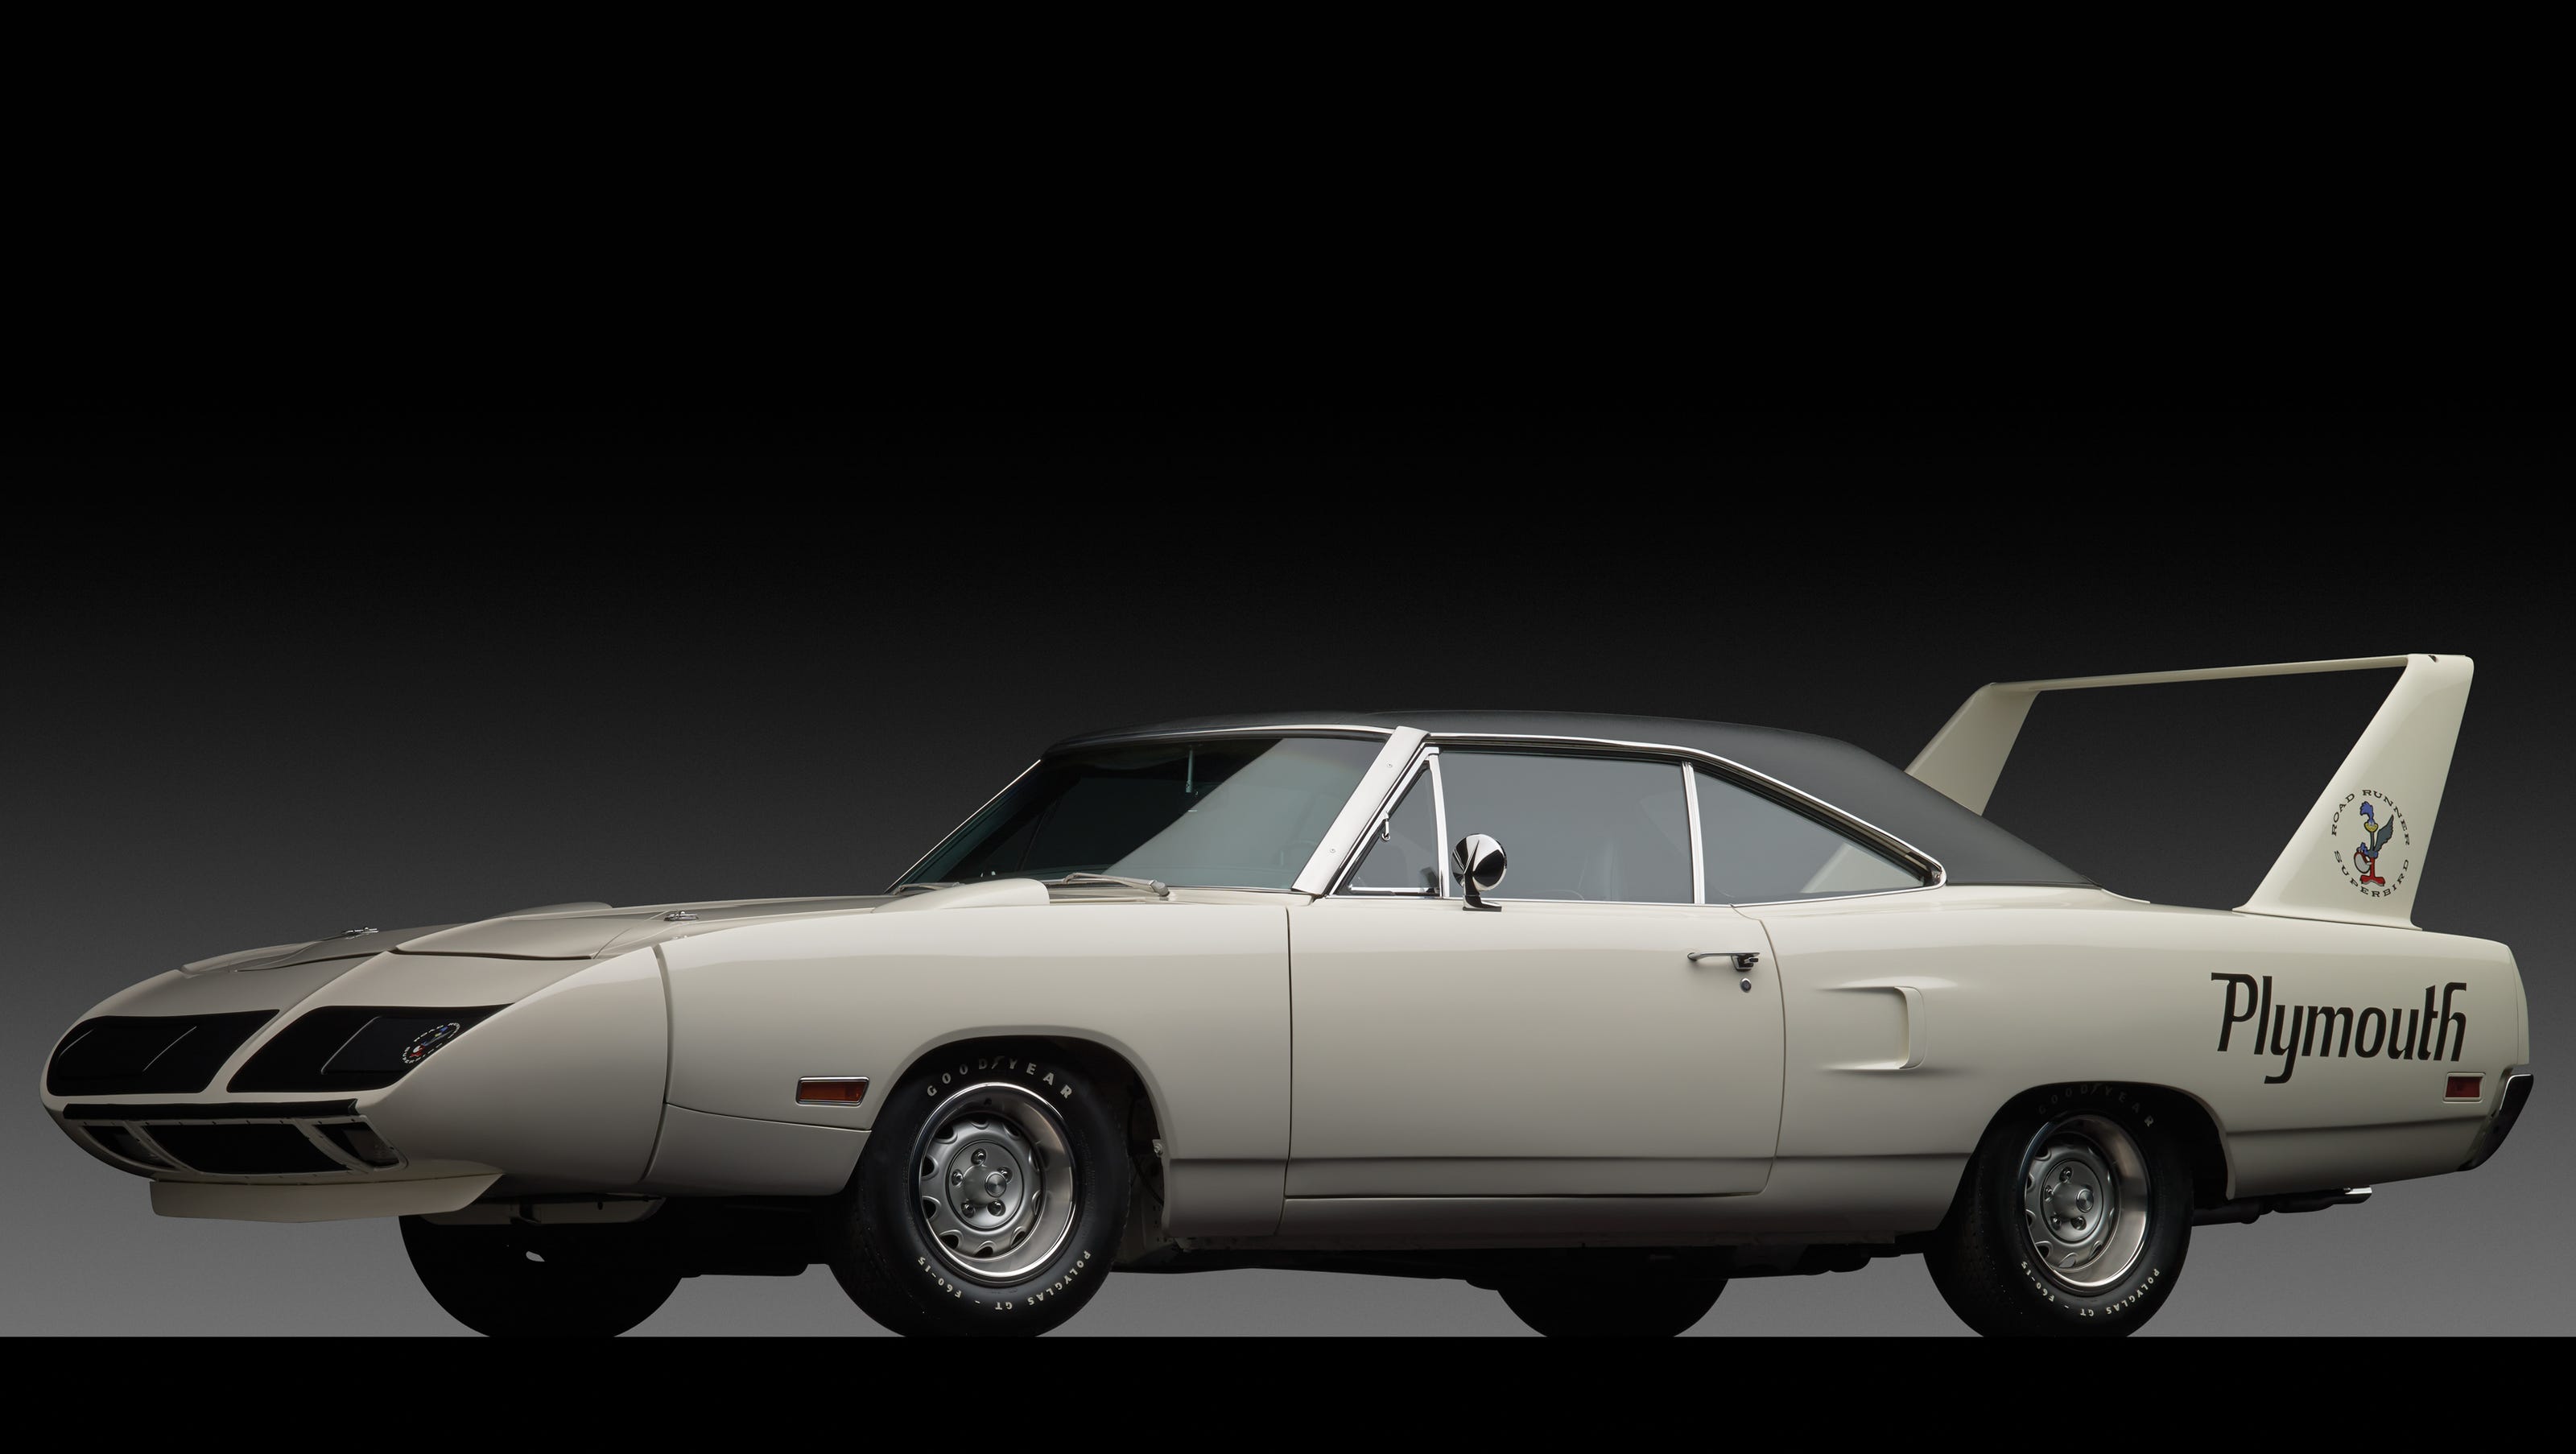 Is a wacky '70 Plymouth Superbird worth $500,000?